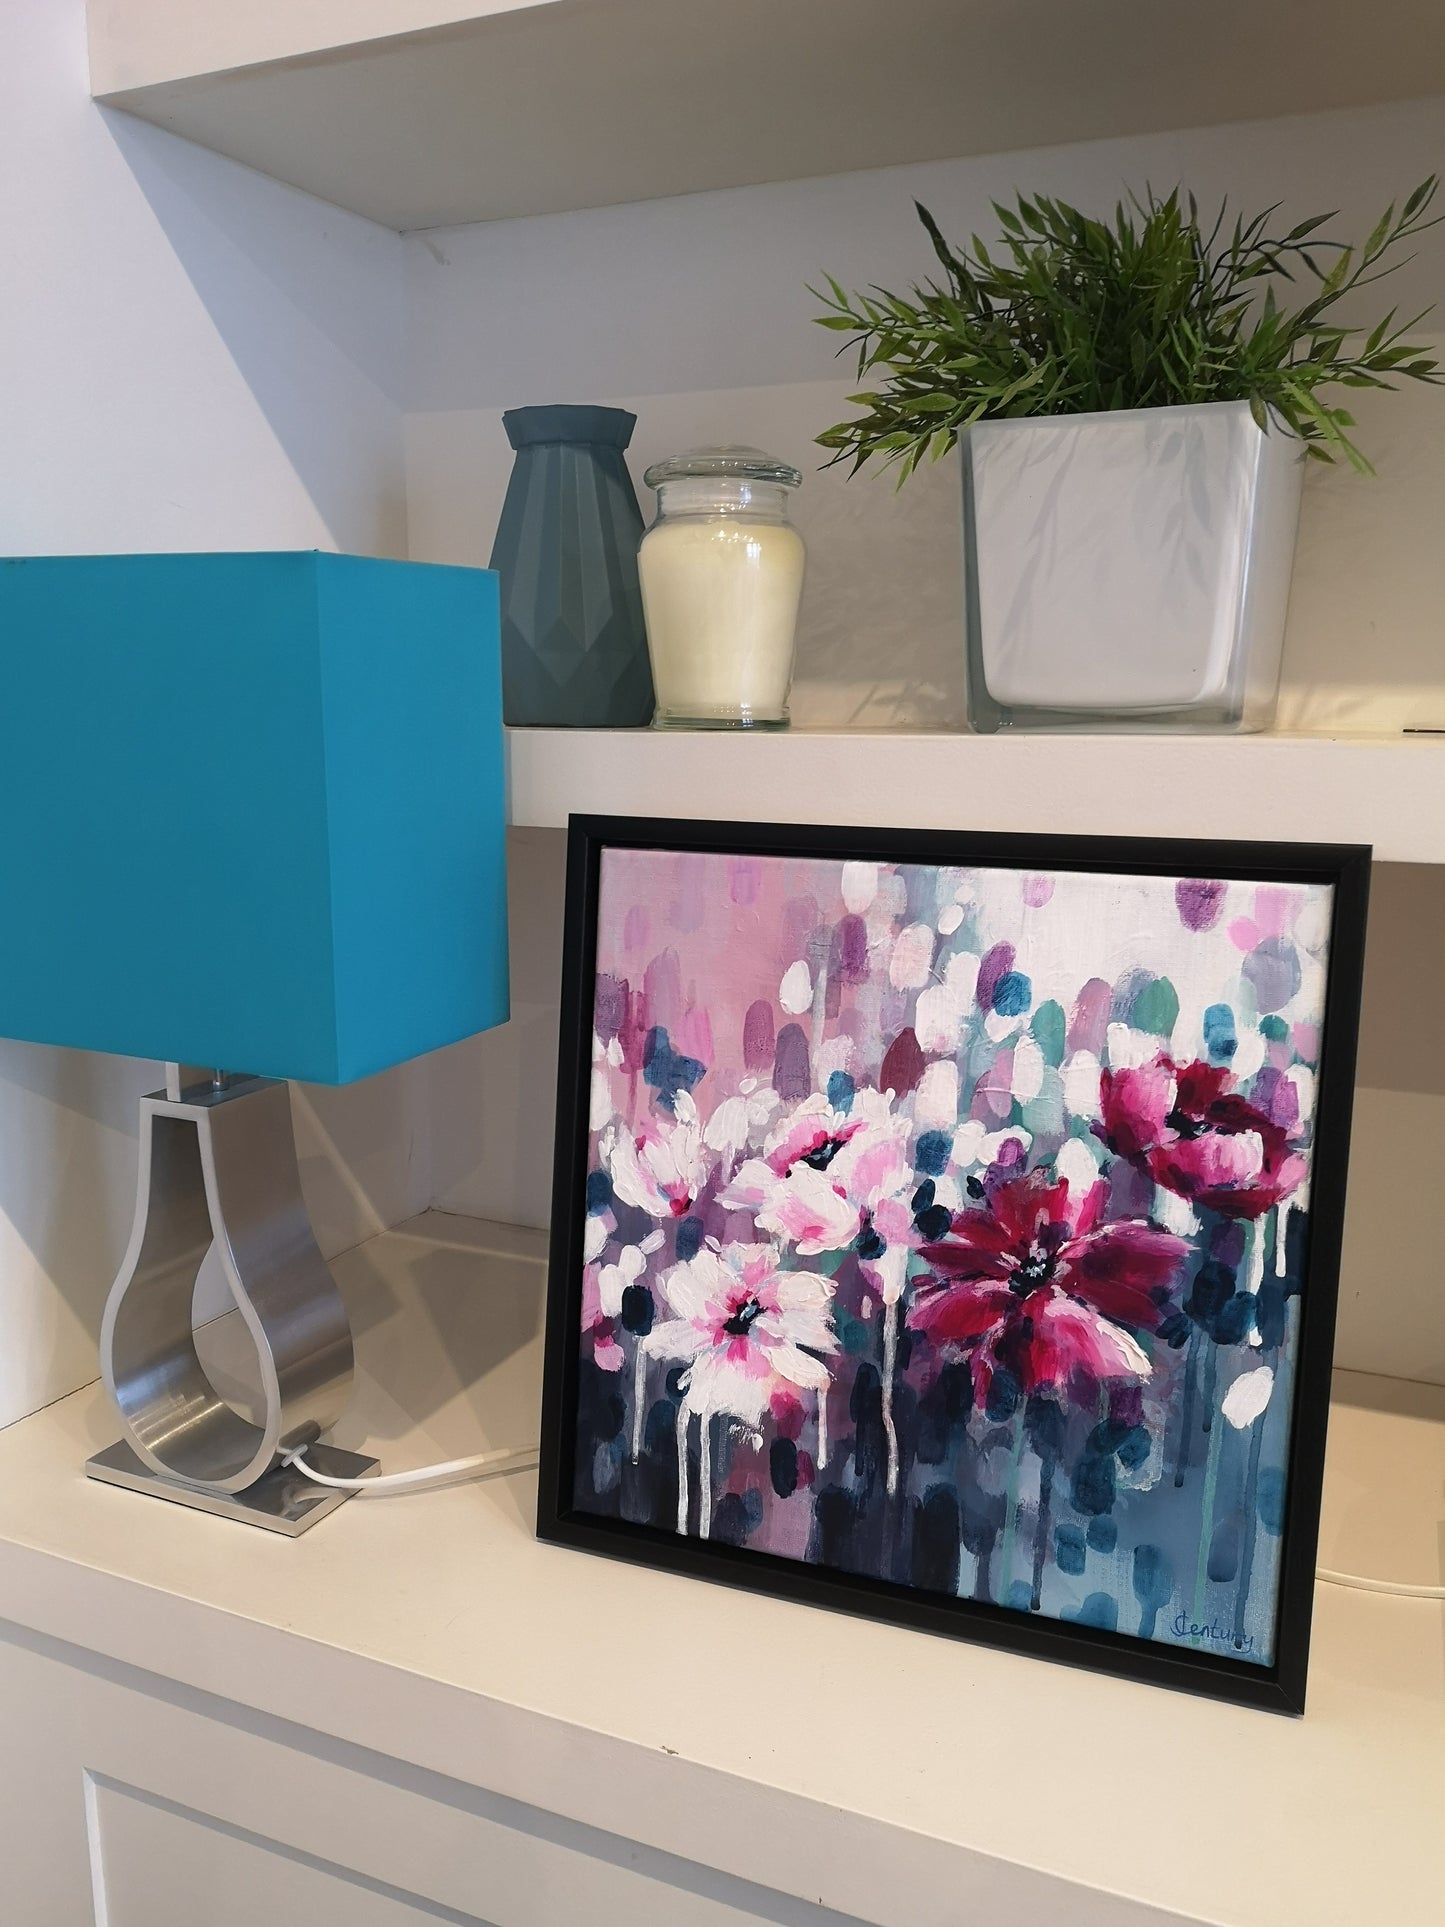 Abstract floral painting in interior setting with blue lamp, plants and vase and candles ornaments